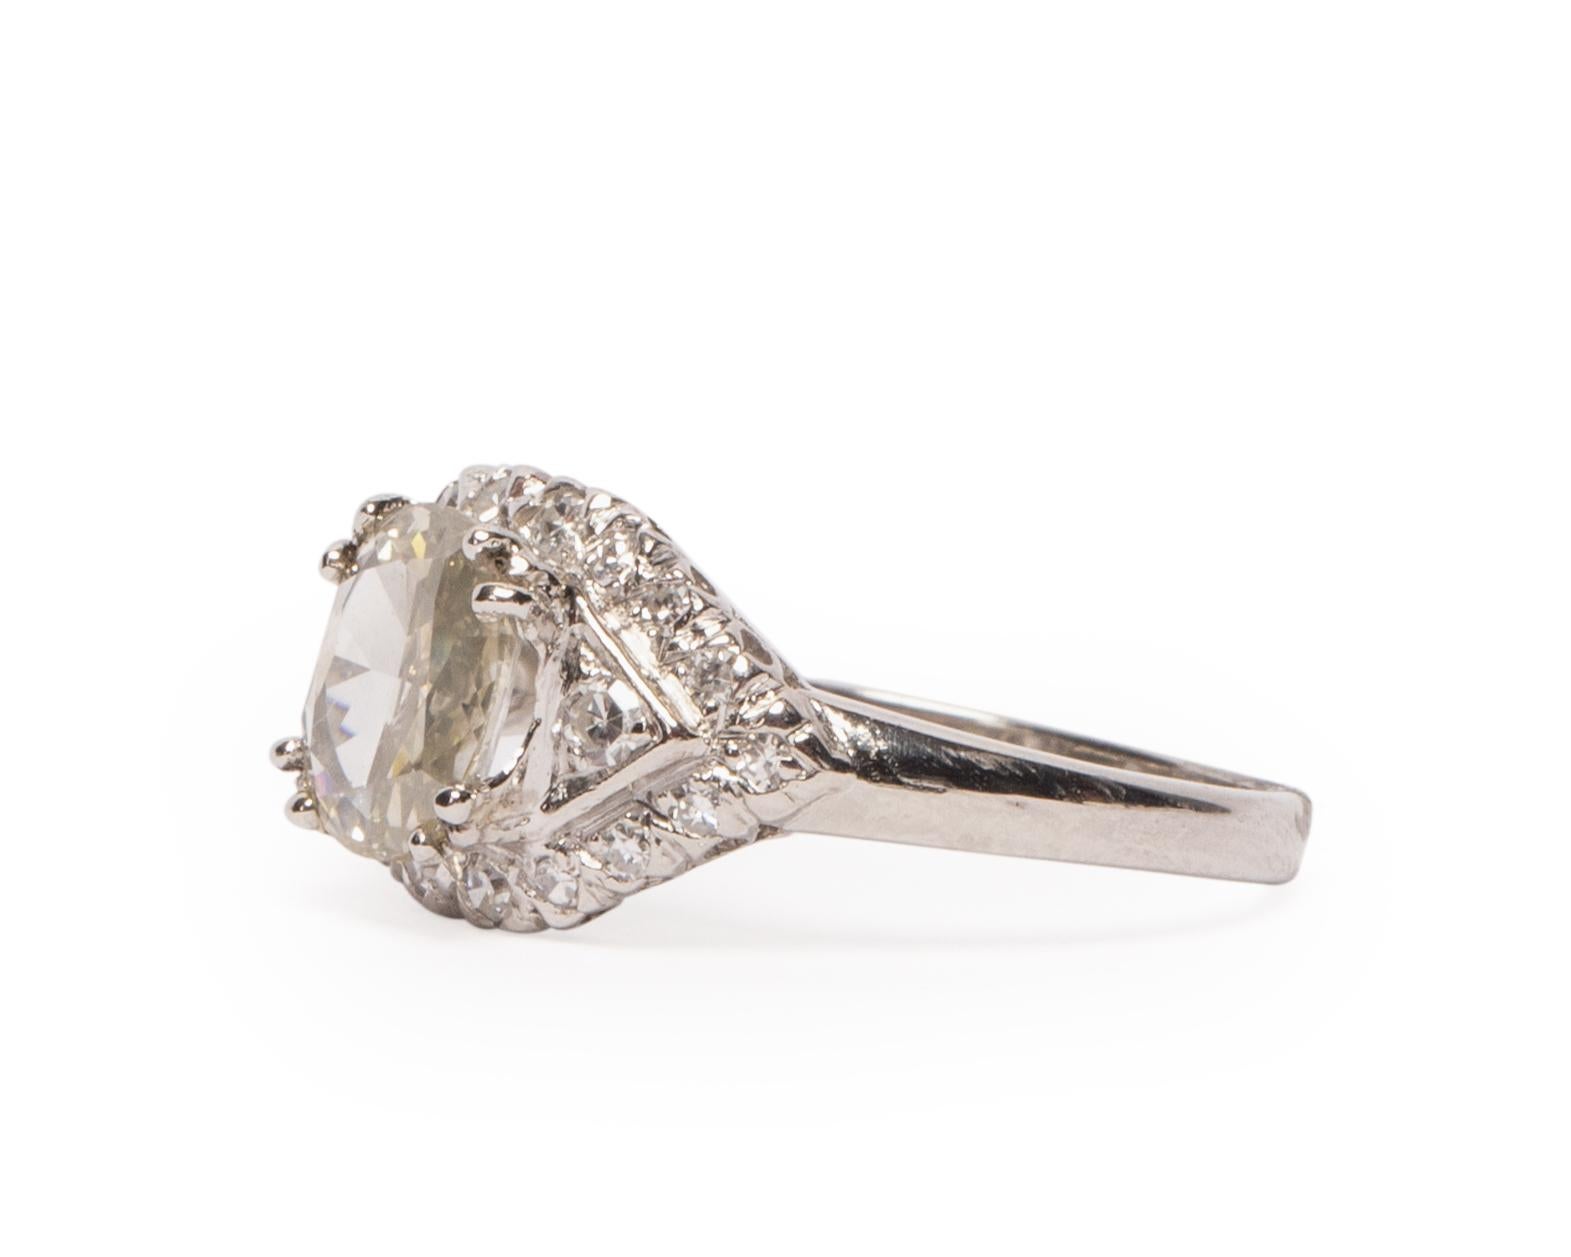 This 1920's beauty is a great example of the Art Deco era. A elegant rose cut diamond accented by two diamonds on either side, surrounded by even more beautiful eye clear diamonds, who doesn't love a little extra sparkle. The platinum ring has stood